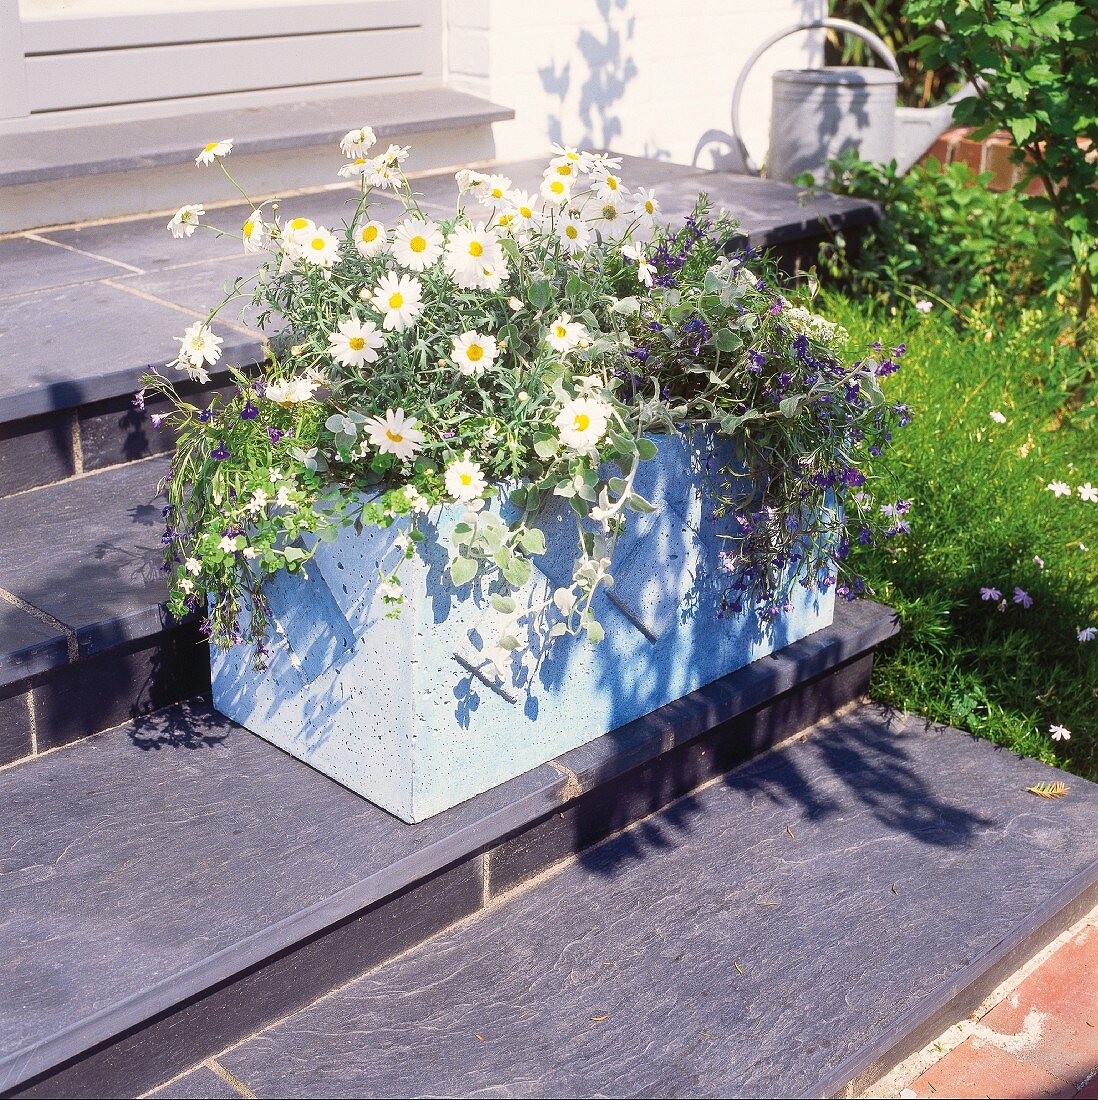 Ox-eye daisies and lobelia in hand-made concrete planting trough on steps